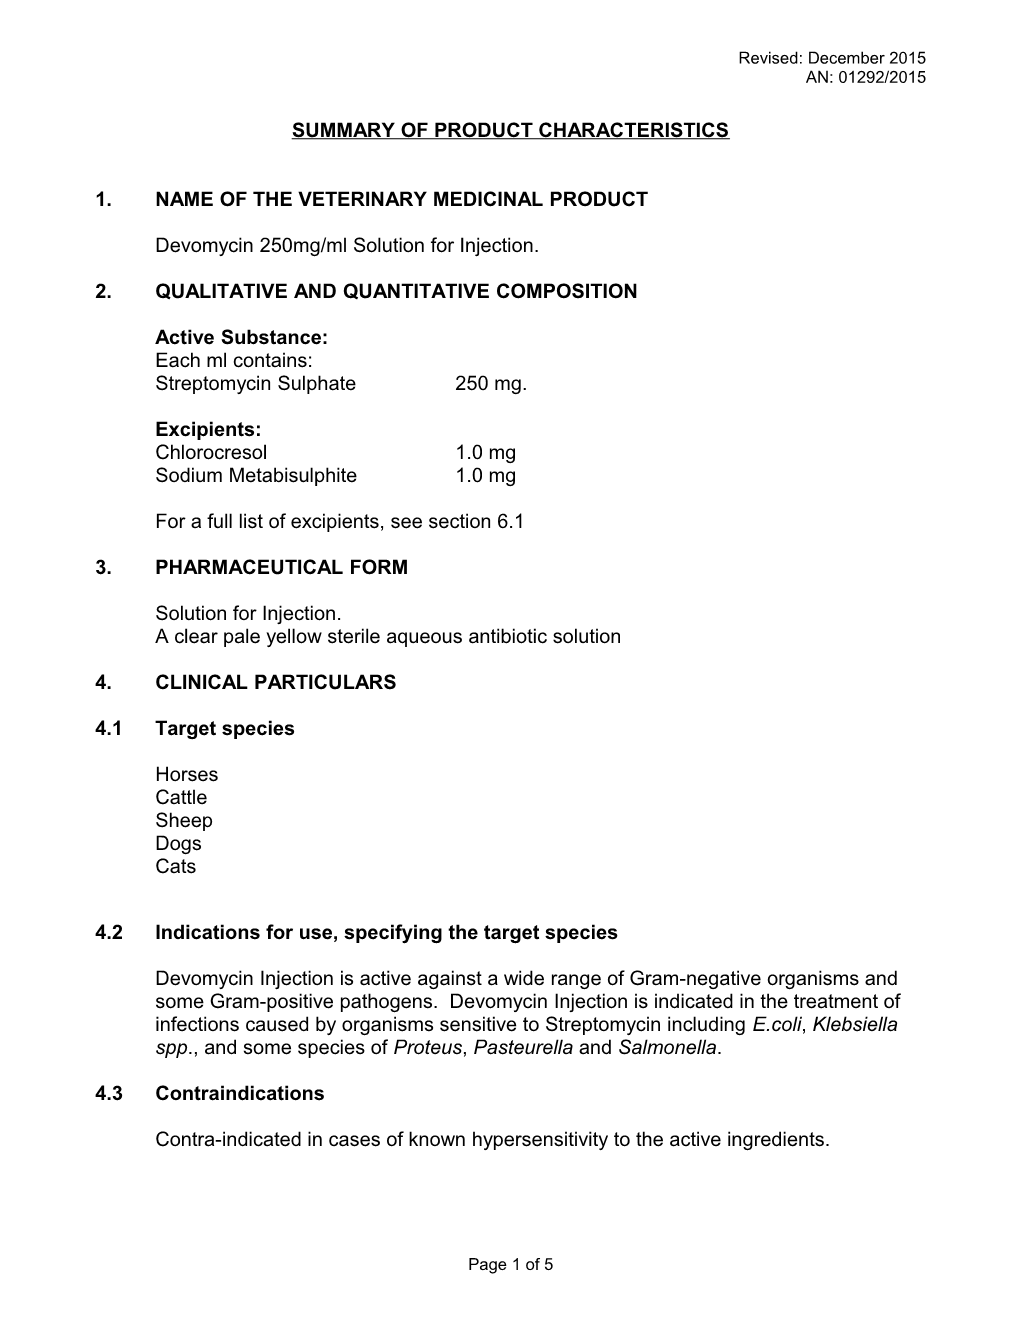 1. Name of the Veterinary Medicinal Product s16